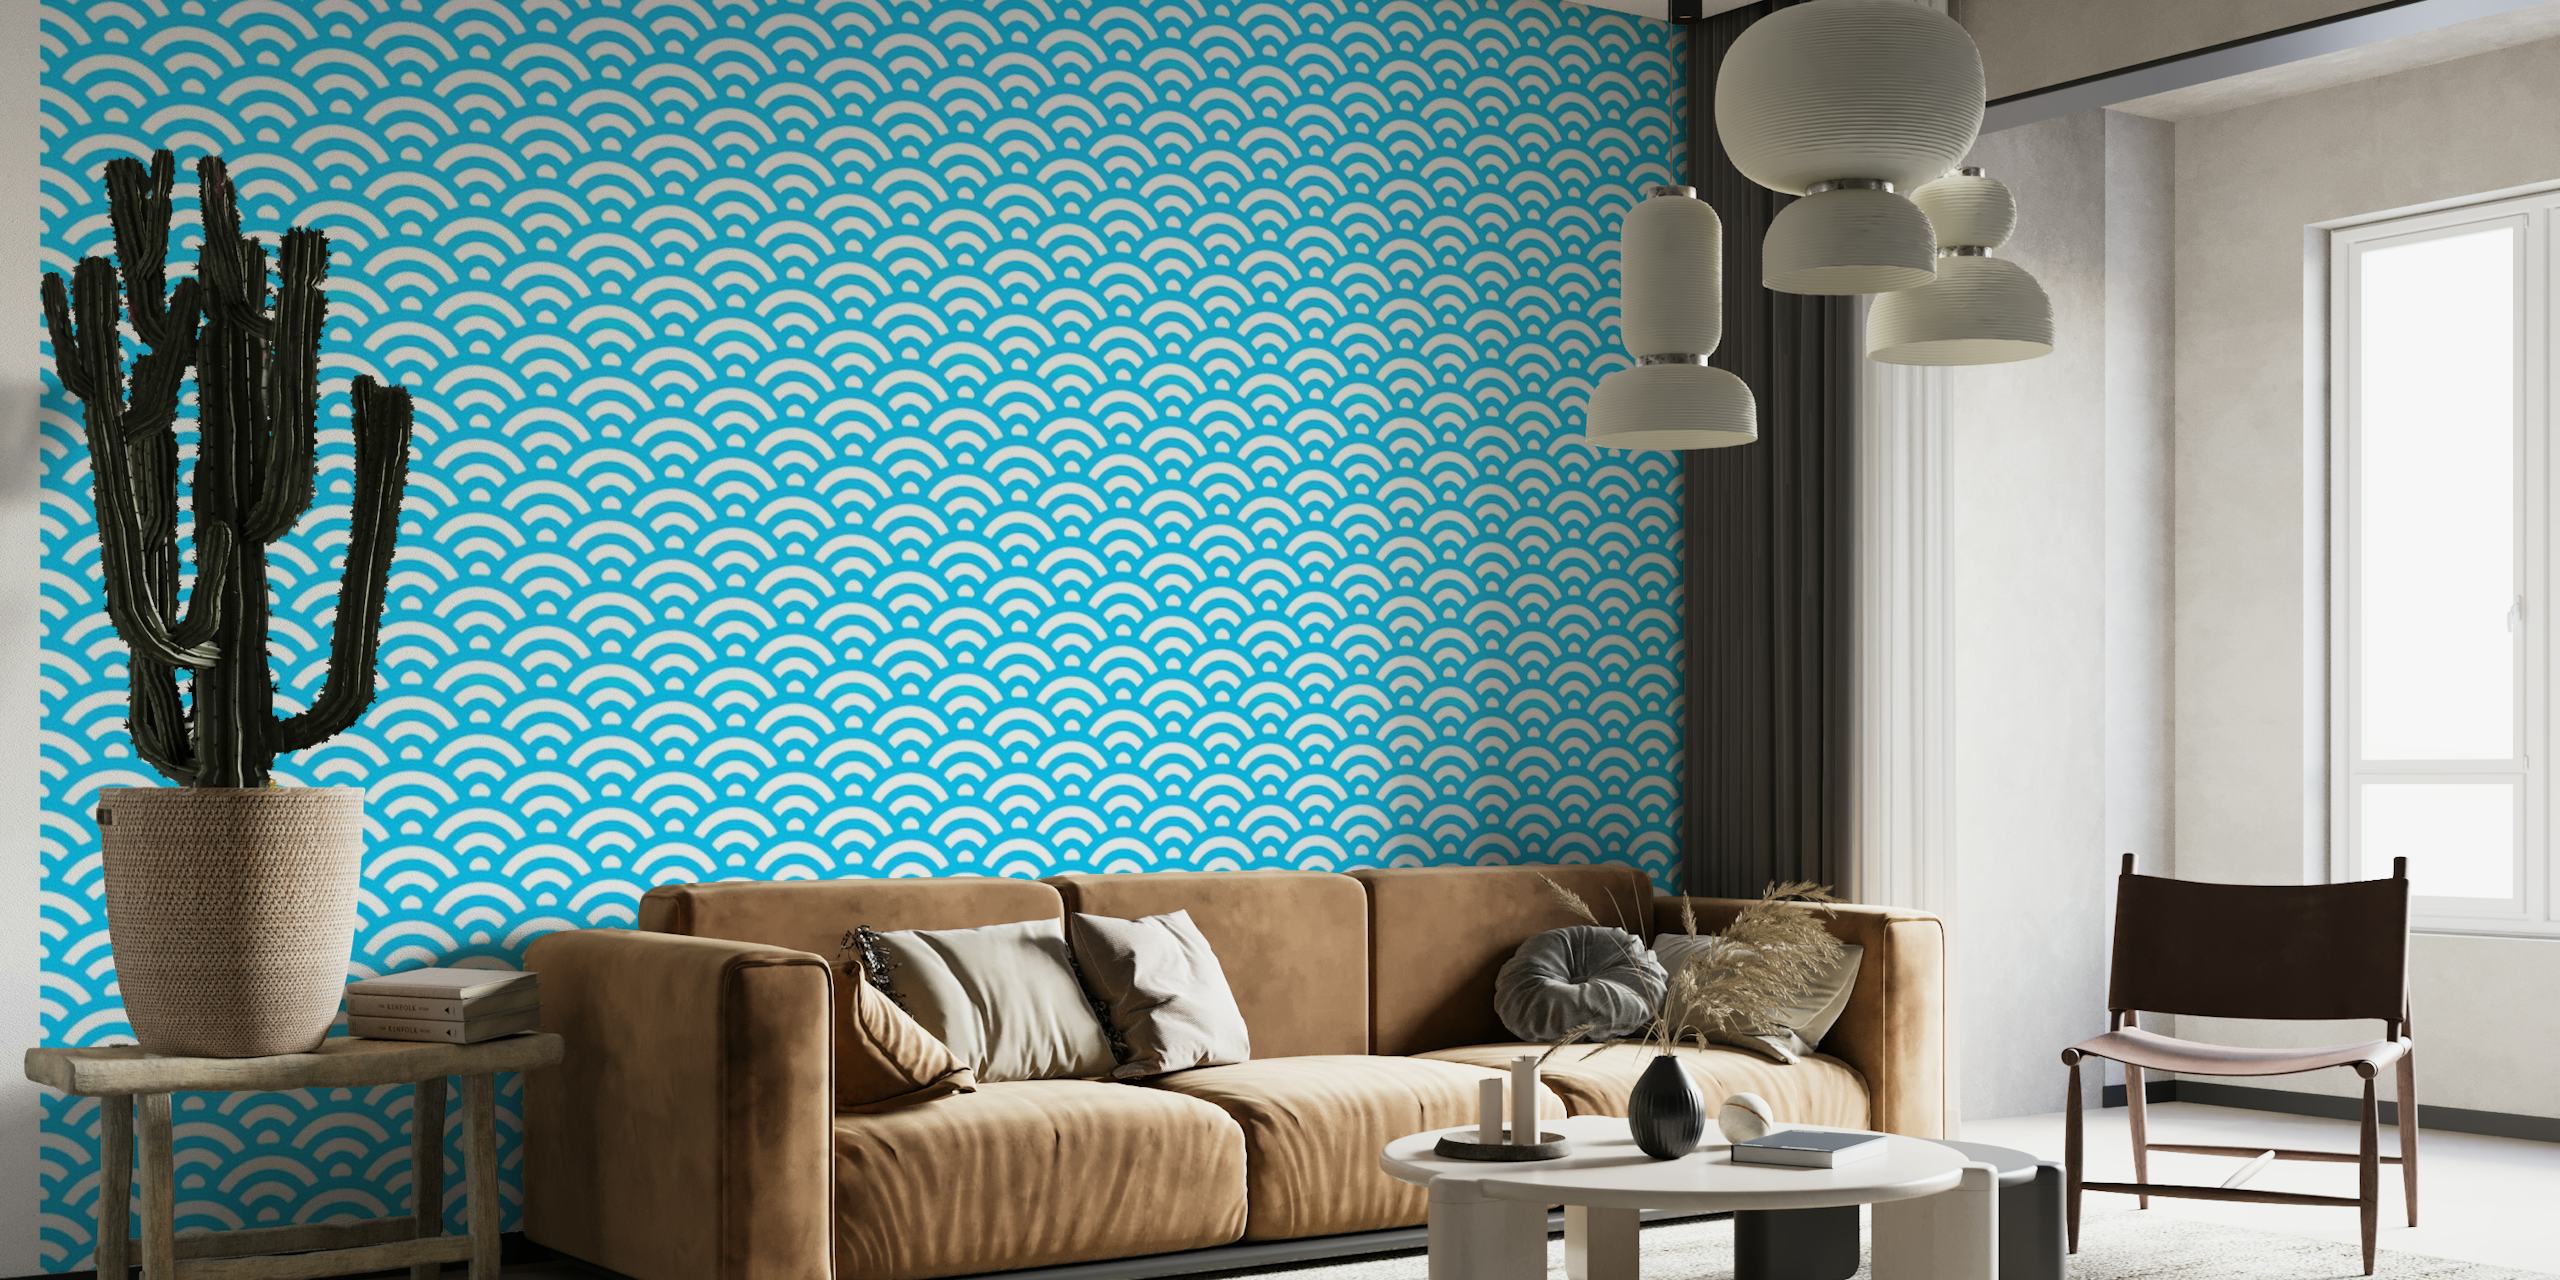 Japanese wave pattern wall mural in calming shades of blue, creating a serene and rhythmic ocean design.